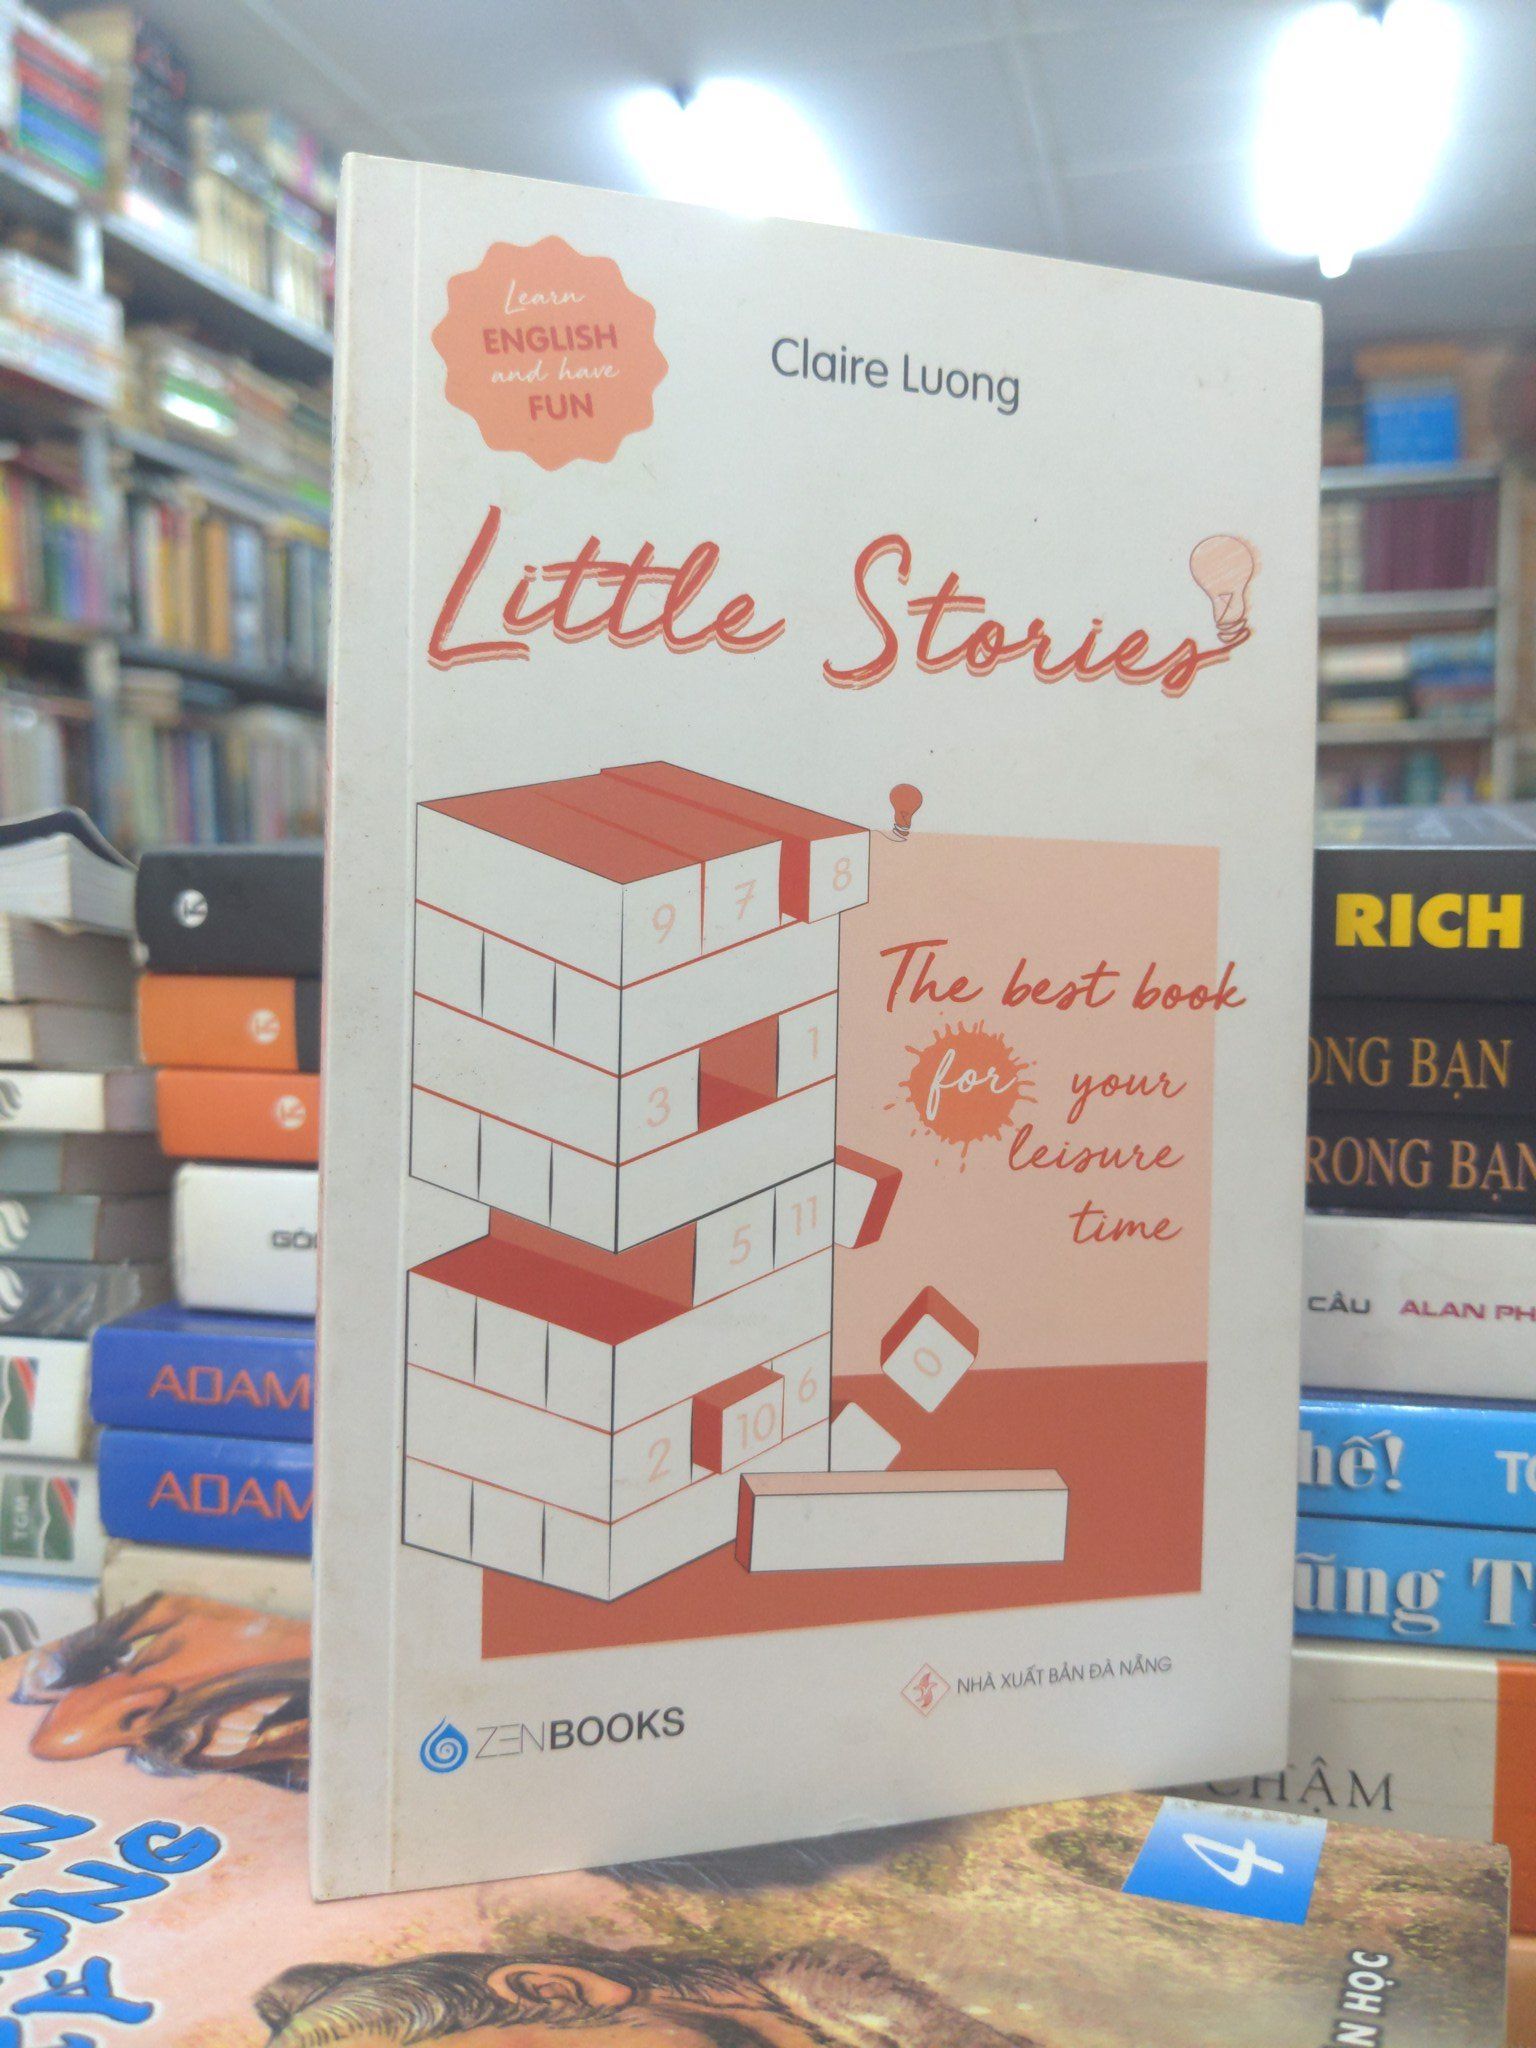  Little Stories the best book for your leisure time - Claire Luong 